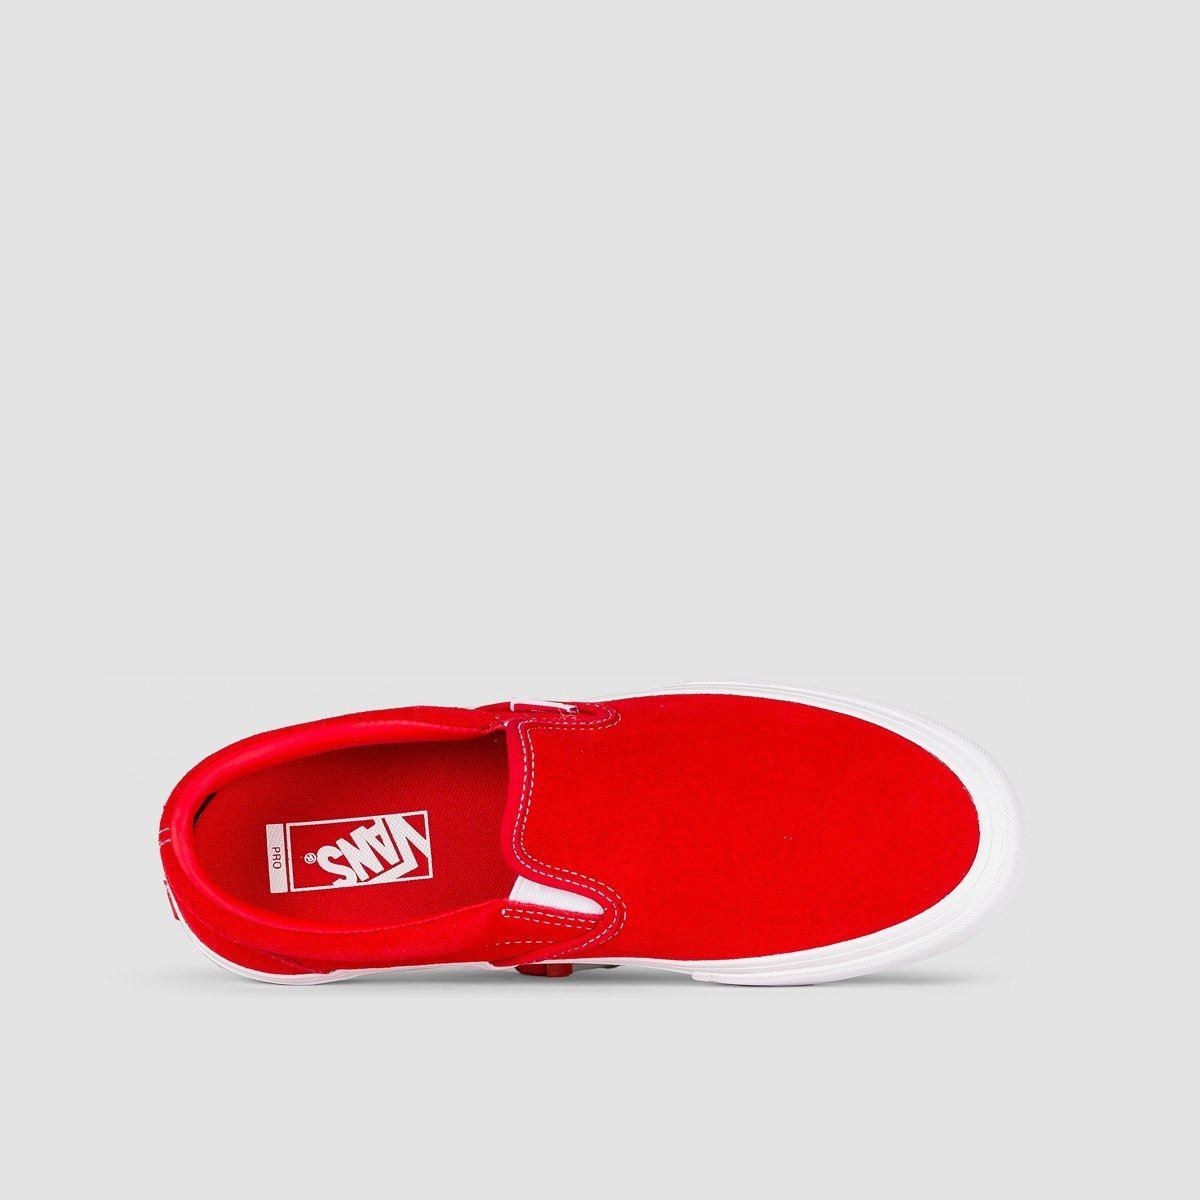 Vans Slip-On Pro Shoes - Suede Red/White